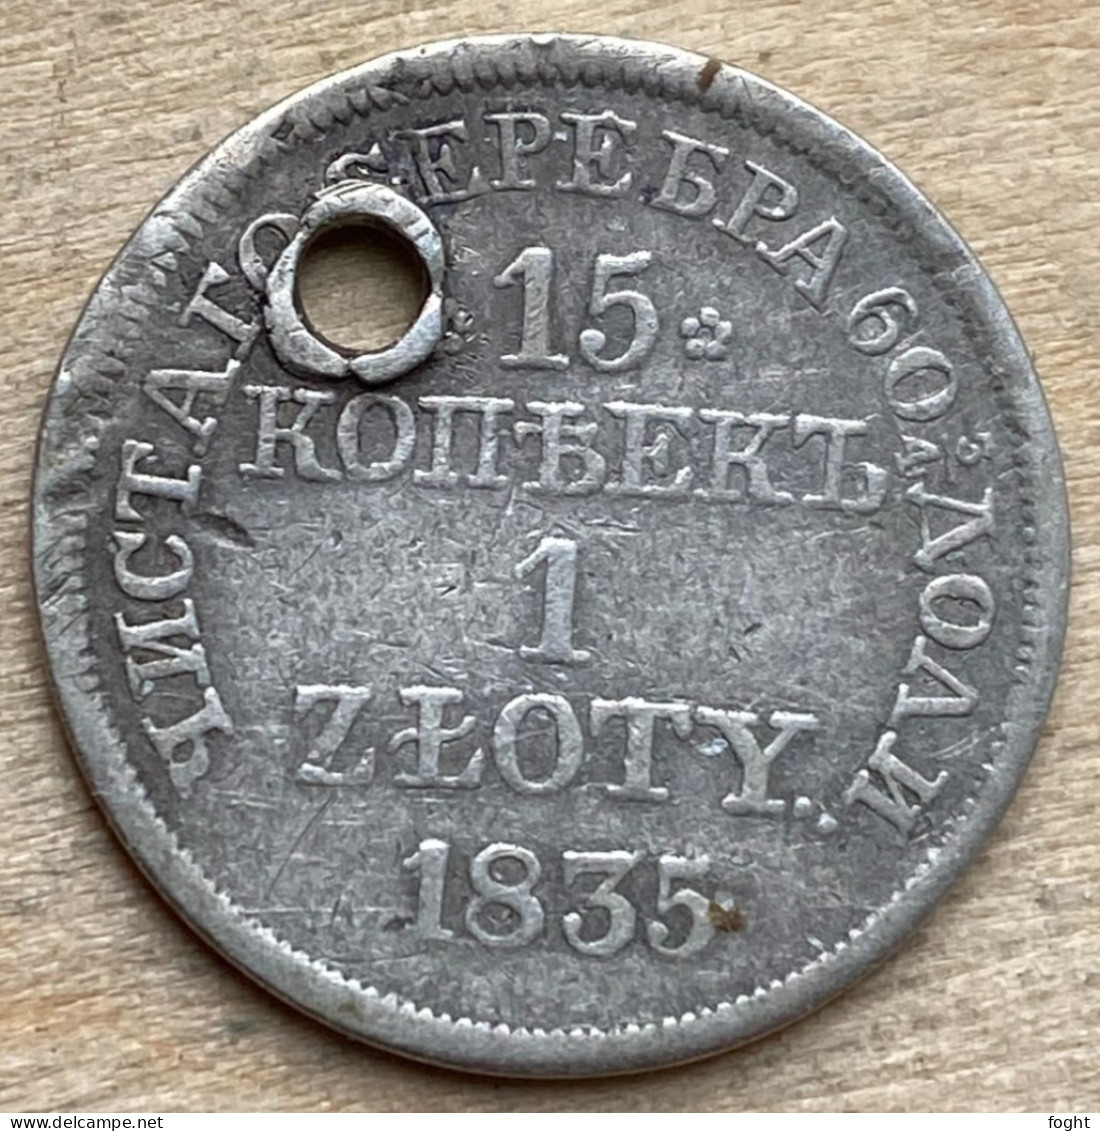 1835 MW Poland/Russia Circulated .868 Silver Coin Zloty-15 Kopeks, With The Hole, C#129,7199 - Poland